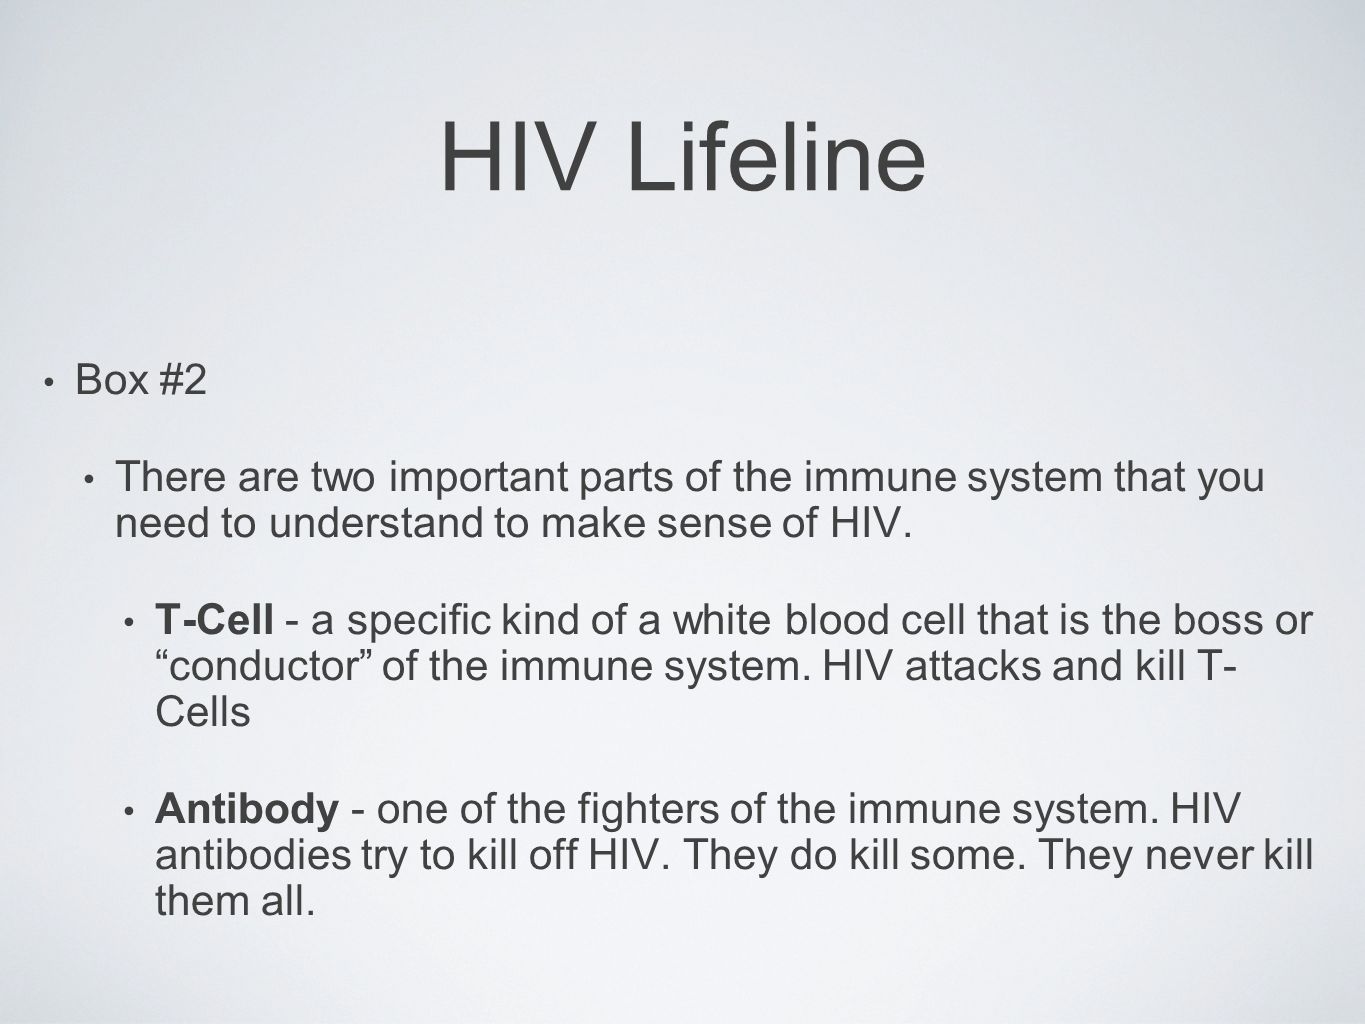 HIV Lifeline Box #2. There are two important parts of the immune system that you need to understand to make sense of HIV.